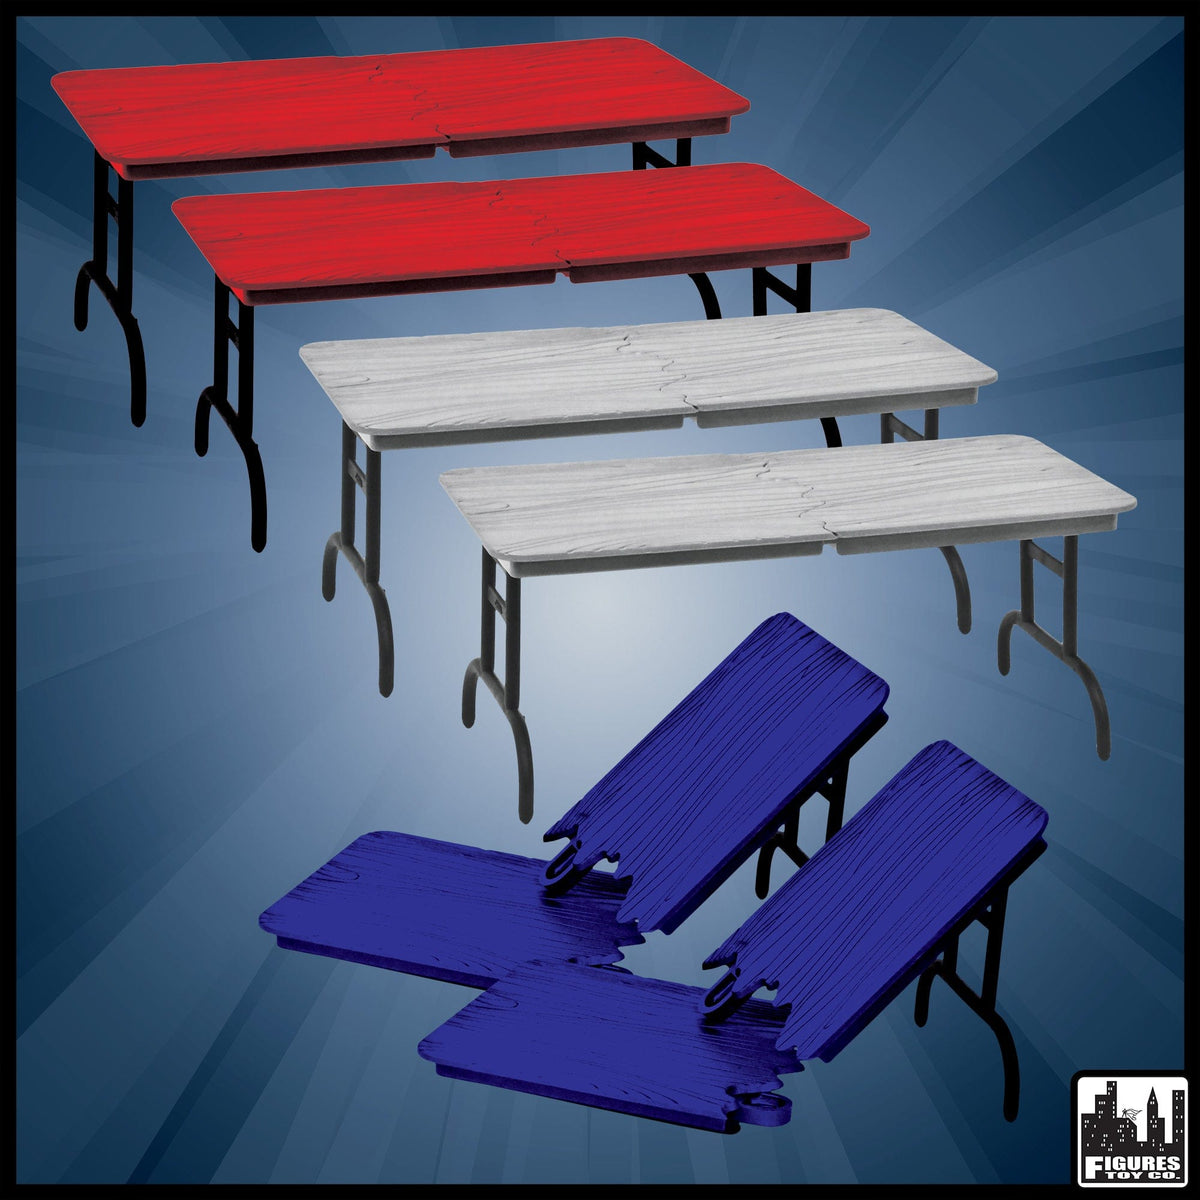 6 Piece Breakable Table Deal for WWE Wrestling Action Figures: Red, Blue &amp; Gray